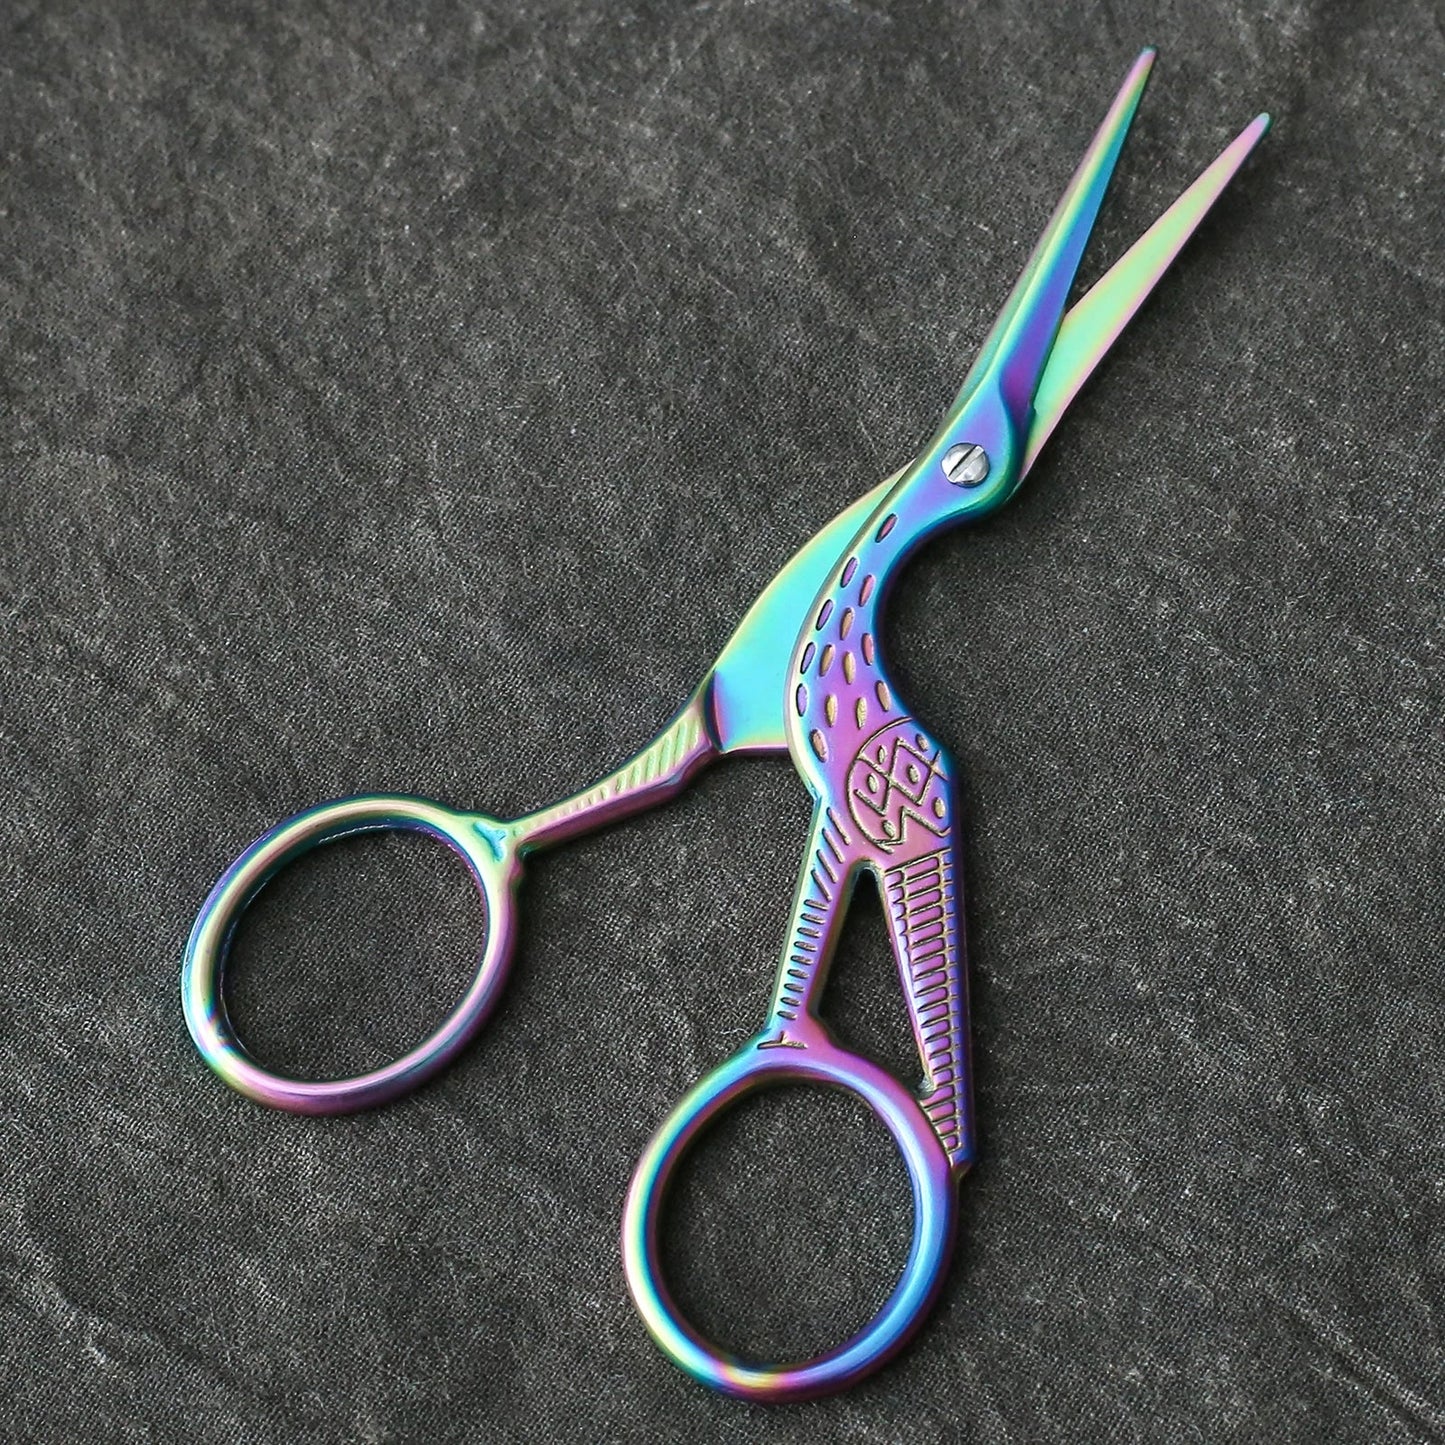 High-Quality & Reliable Stainless Steel Scissors